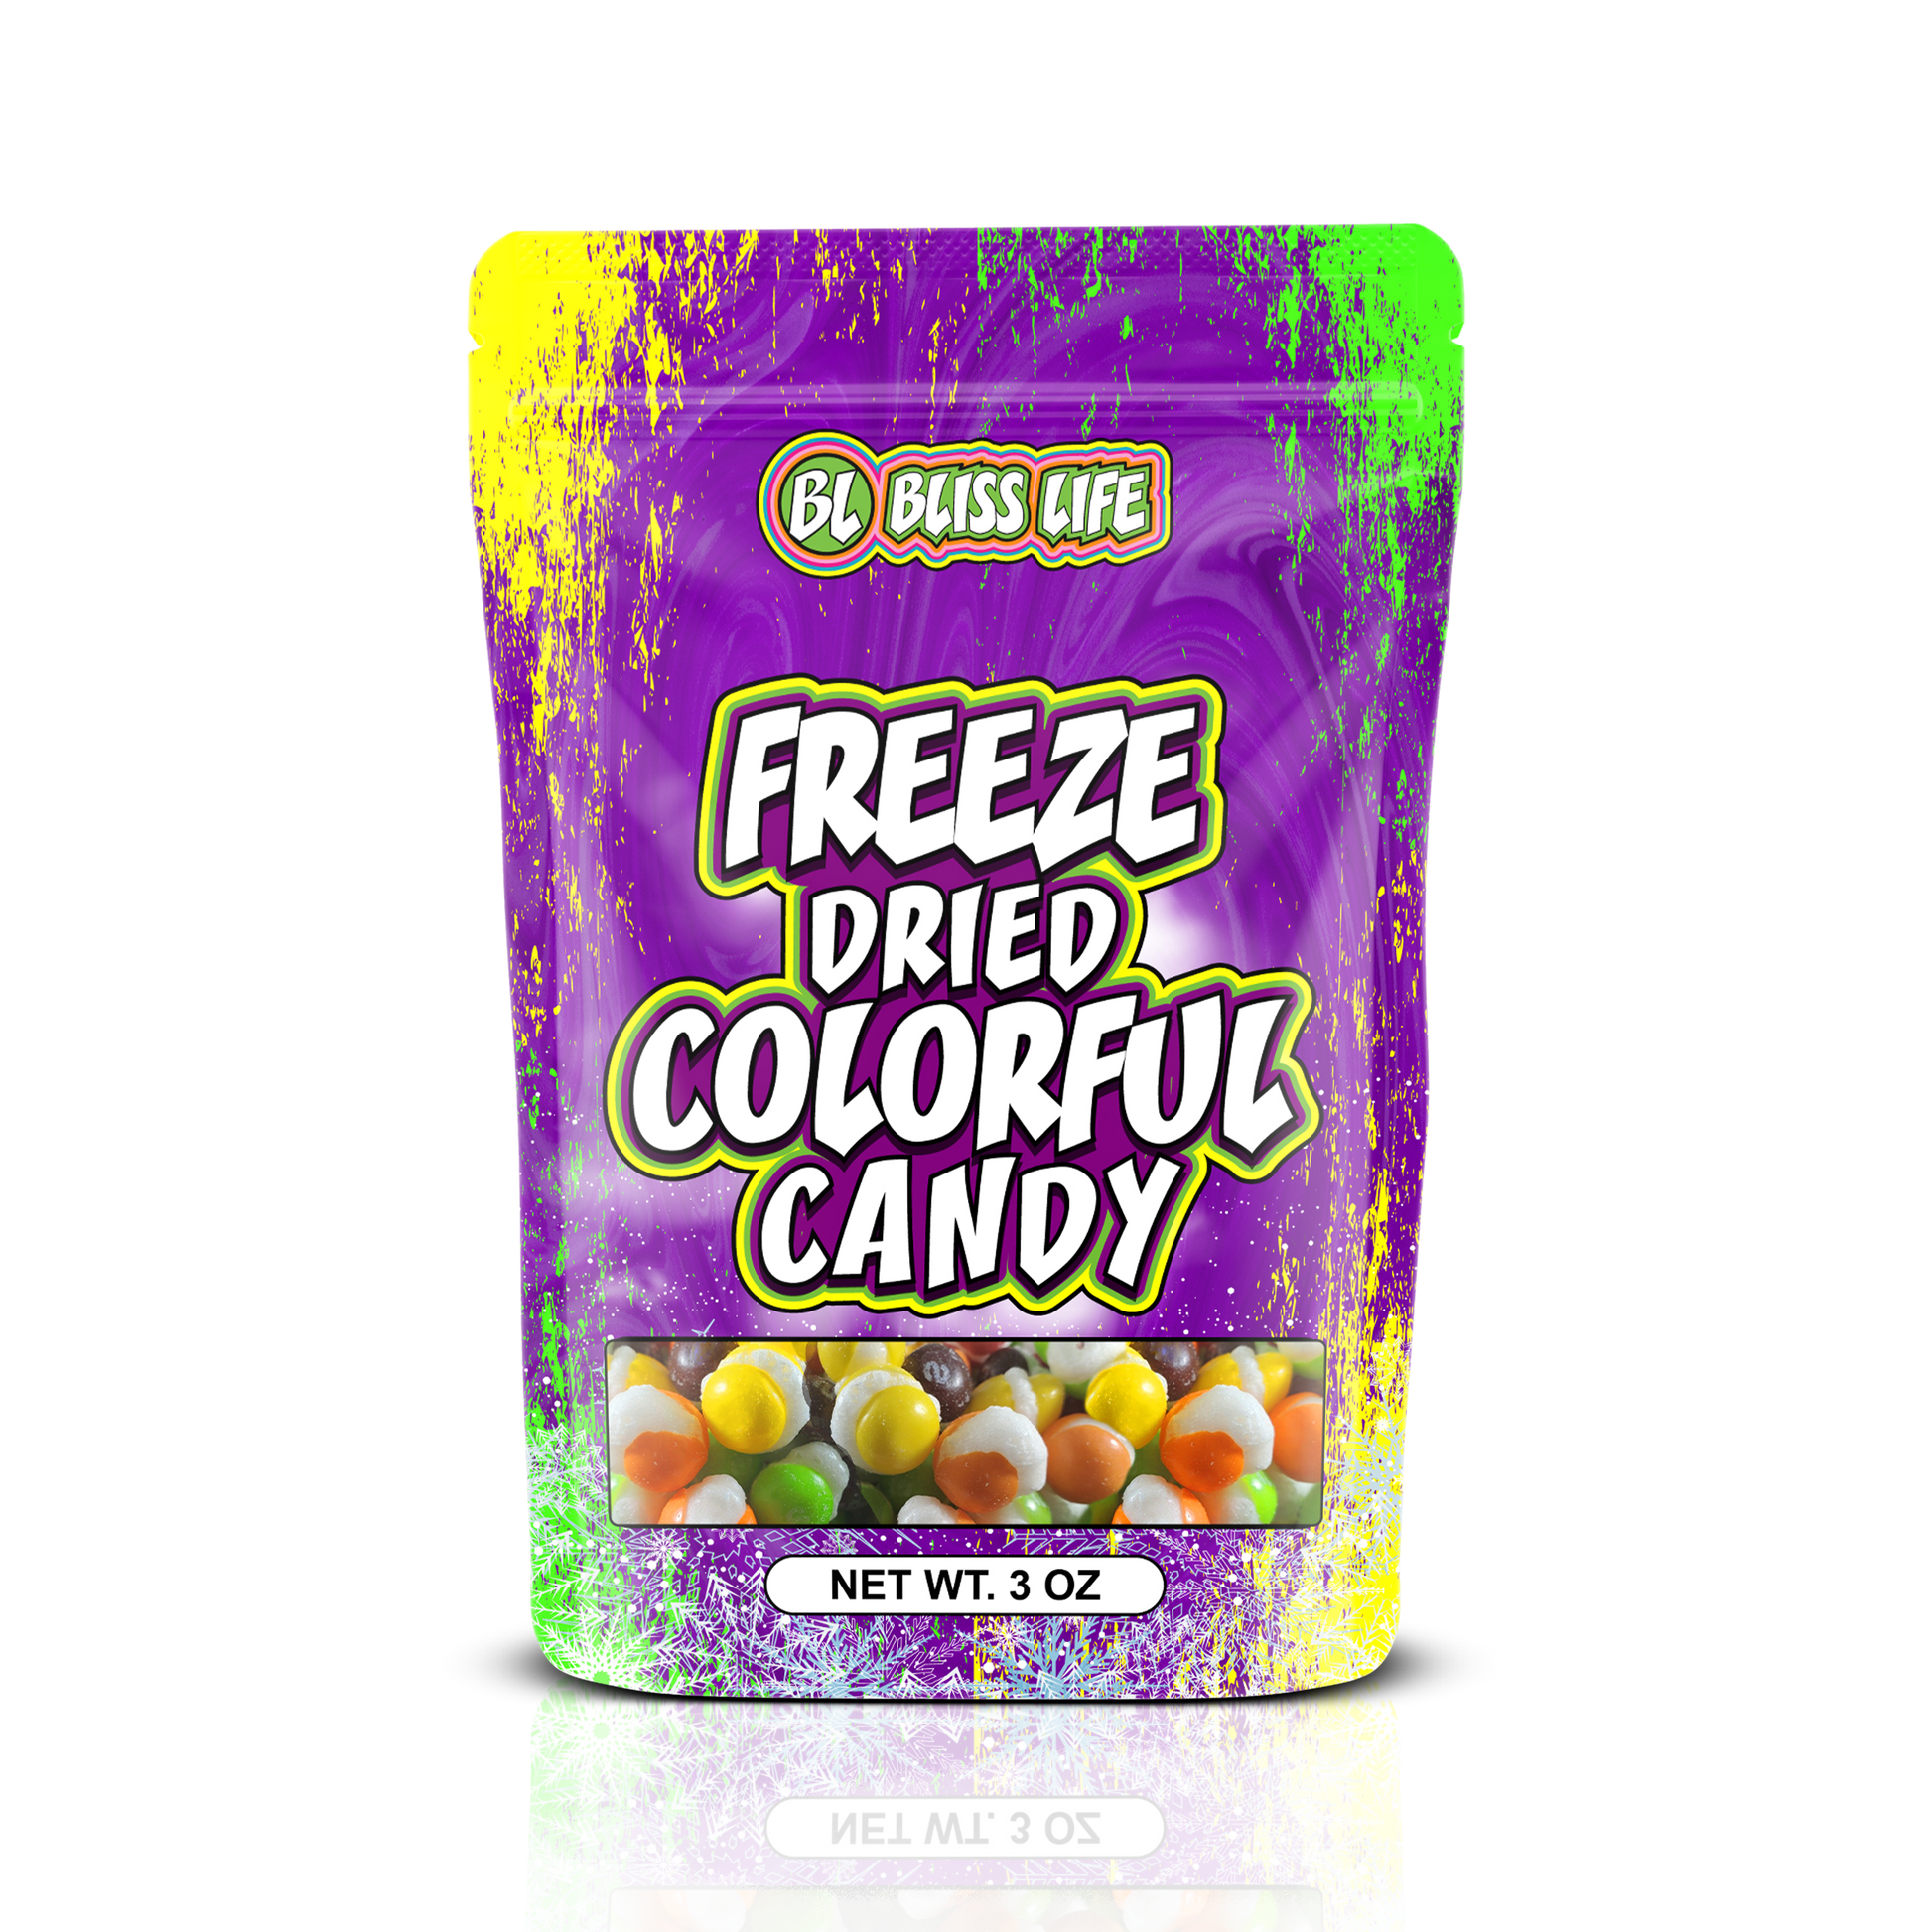 Freeze Dried Original Colorful Candy